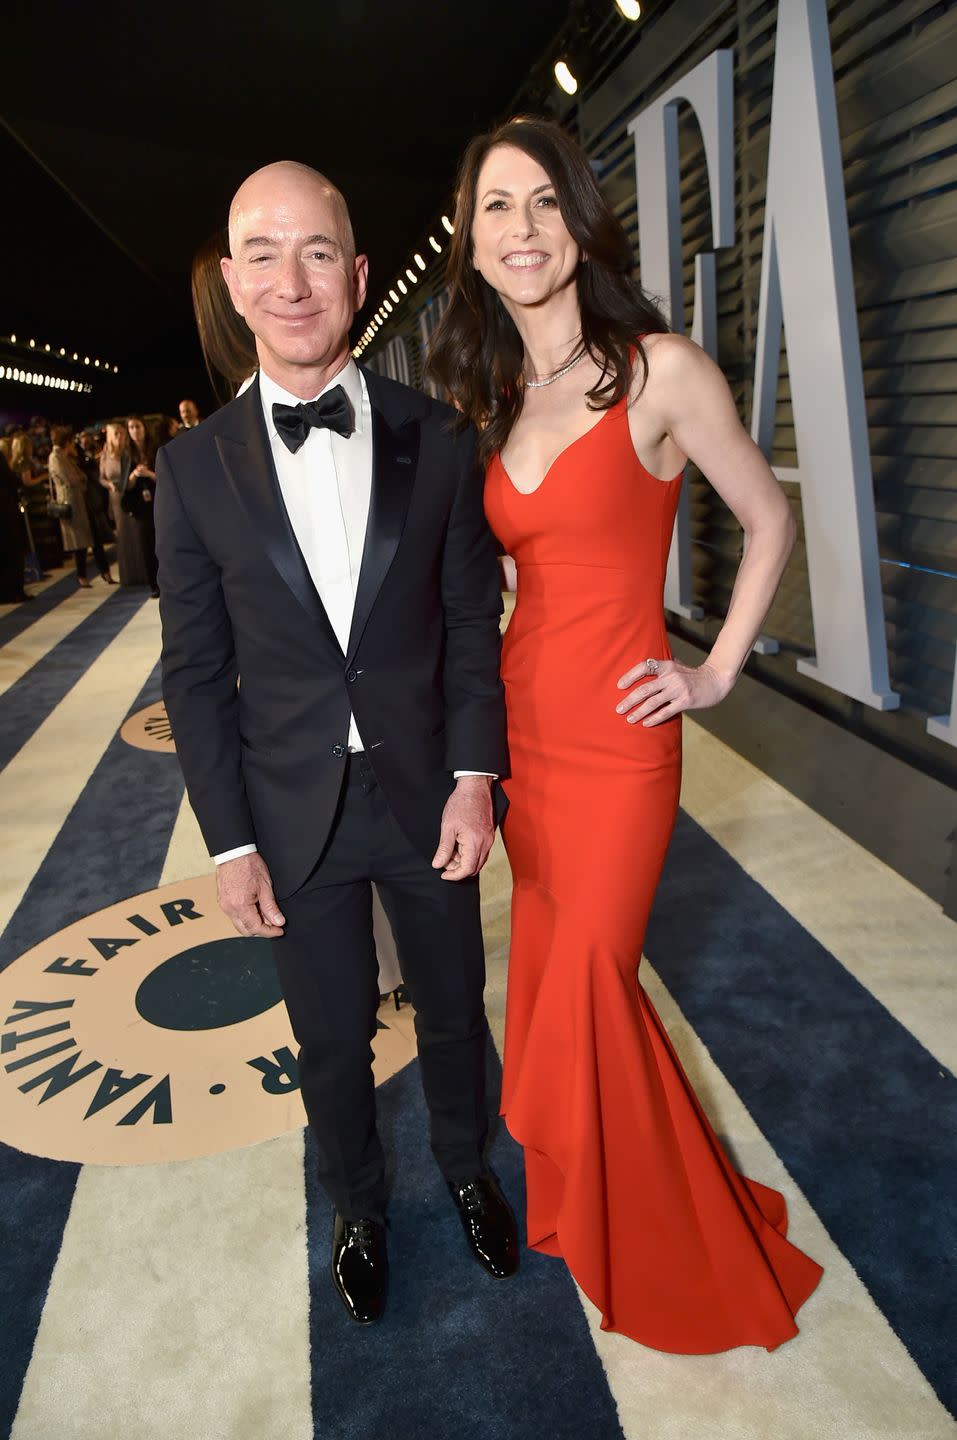 <p>Married for more than 25 years, the couple split in 2019 over <a href="https://www.townandcountrymag.com/society/money-and-power/a26251113/jeff-bezos-lauren-sanchez-relationship-timeline/" rel="nofollow noopener" target="_blank" data-ylk="slk:rumors of his infidelity" class="link ">rumors of his infidelity</a>. Mackenzie received $38 billion (yes, billion!) in the split but has since become a prolific philanthropist, <a href="https://www.independent.co.uk/news/world/americas/jeff-bezos-mackenzie-scott-amazon-b1866409.html" rel="nofollow noopener" target="_blank" data-ylk="slk:donating billions" class="link ">donating billions</a> (again, yes, billions!) to various charities since the divorce. </p>